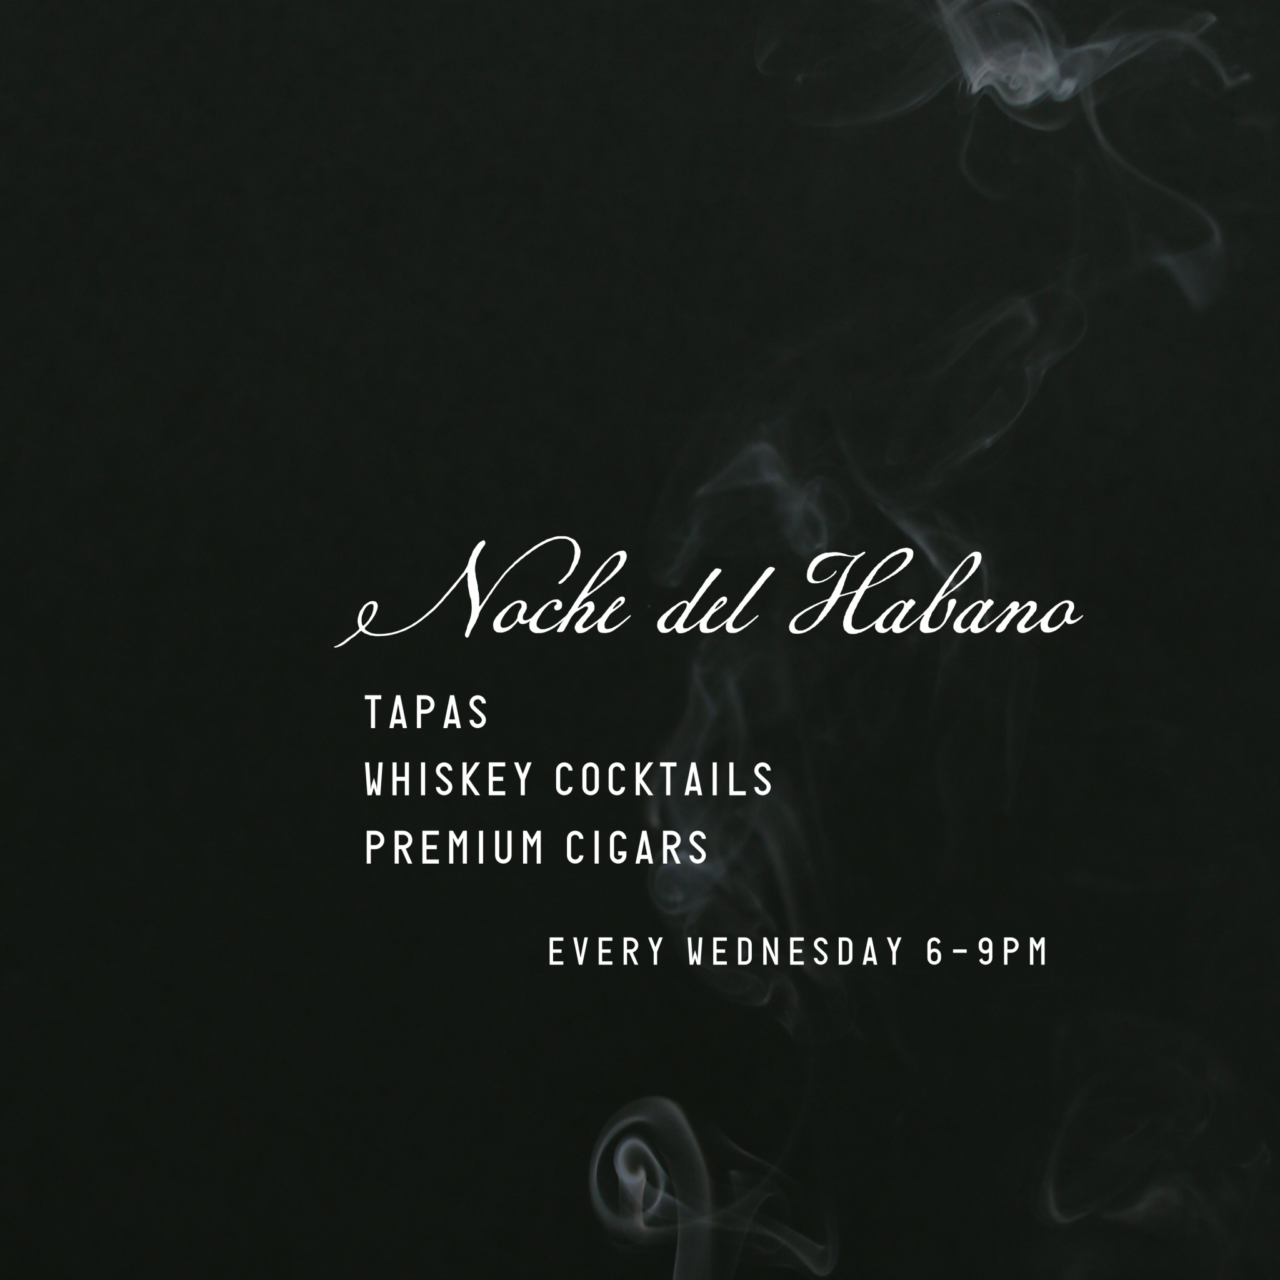 Noche del Habano event flyer, white words on a black background at our Ybor City hotel.